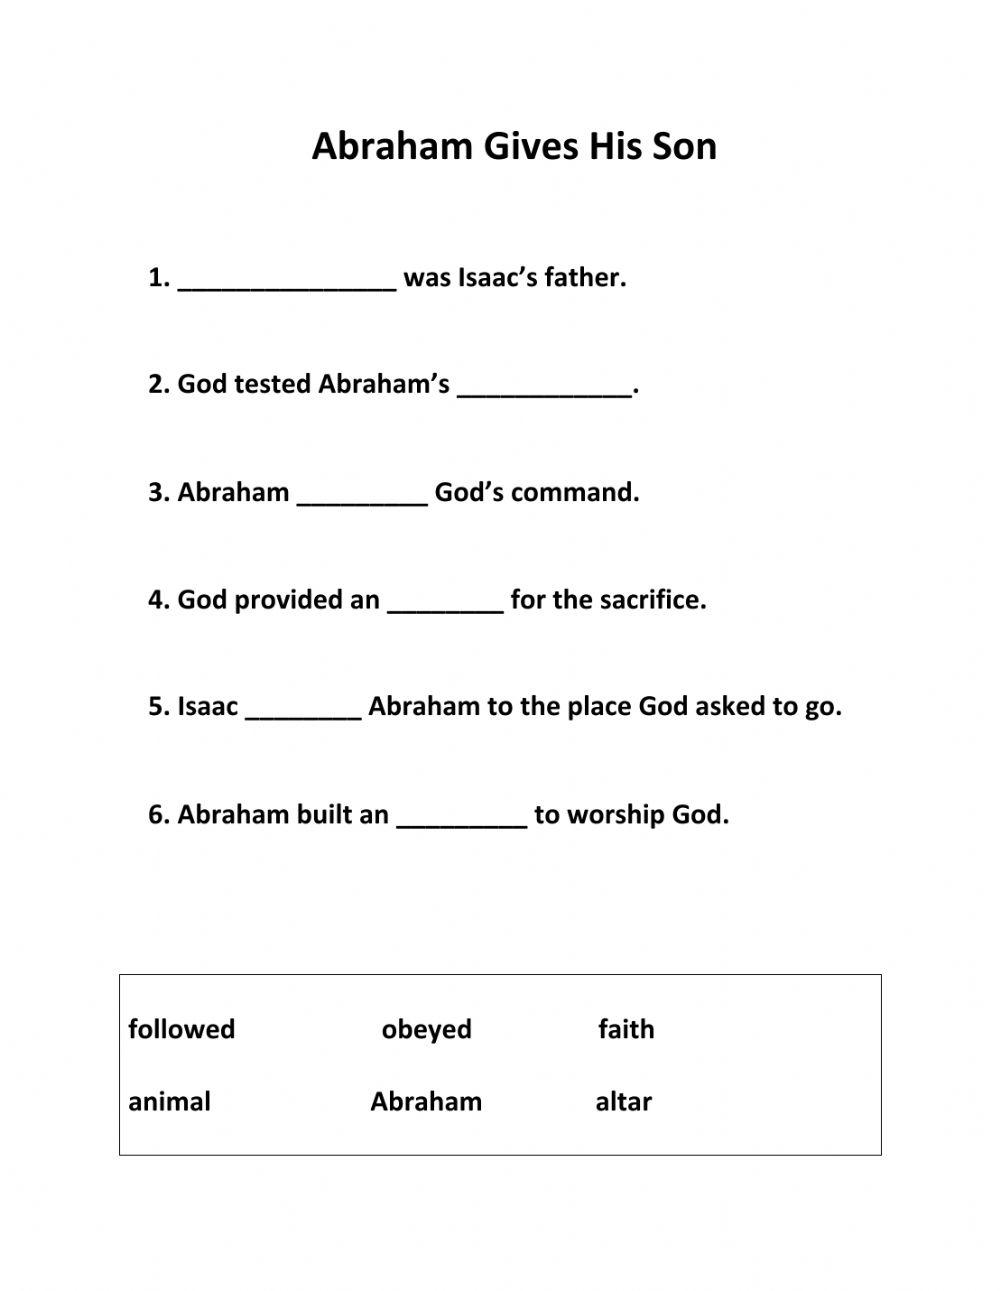 Abraham Gives His Son - Fill Blank